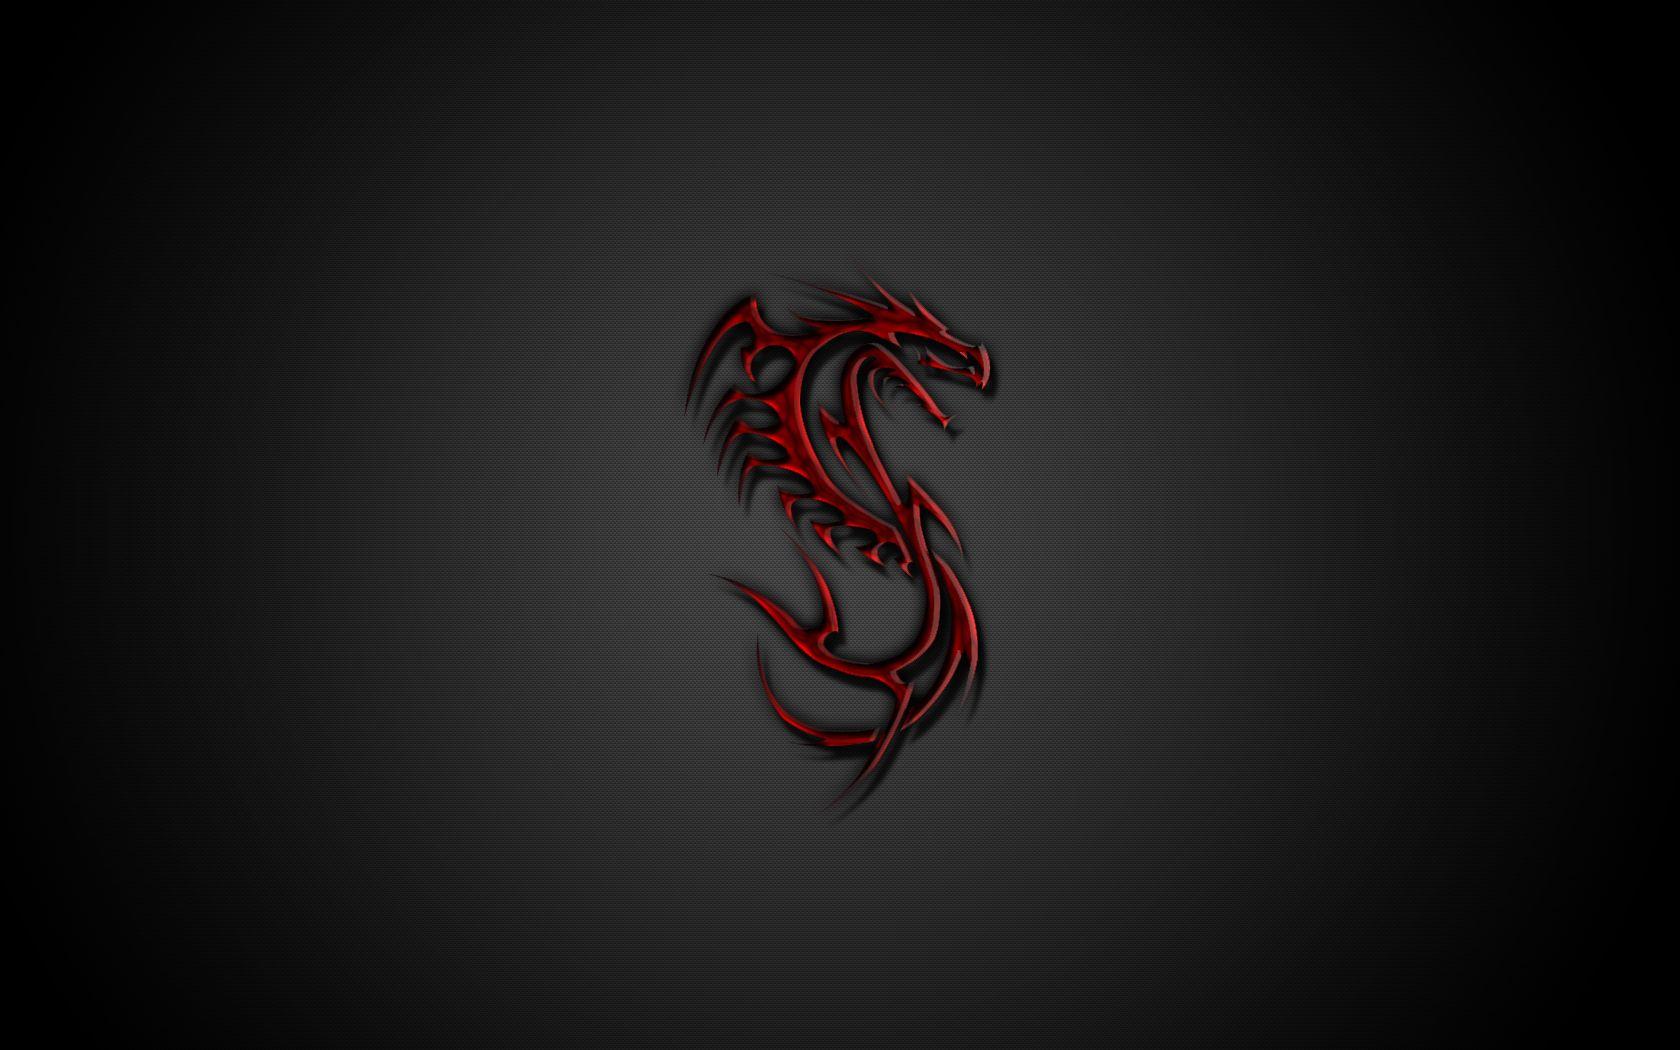 Red Dragon Wallpaper, 36 Red Dragon 2016 Wallpaper's Archive, Most